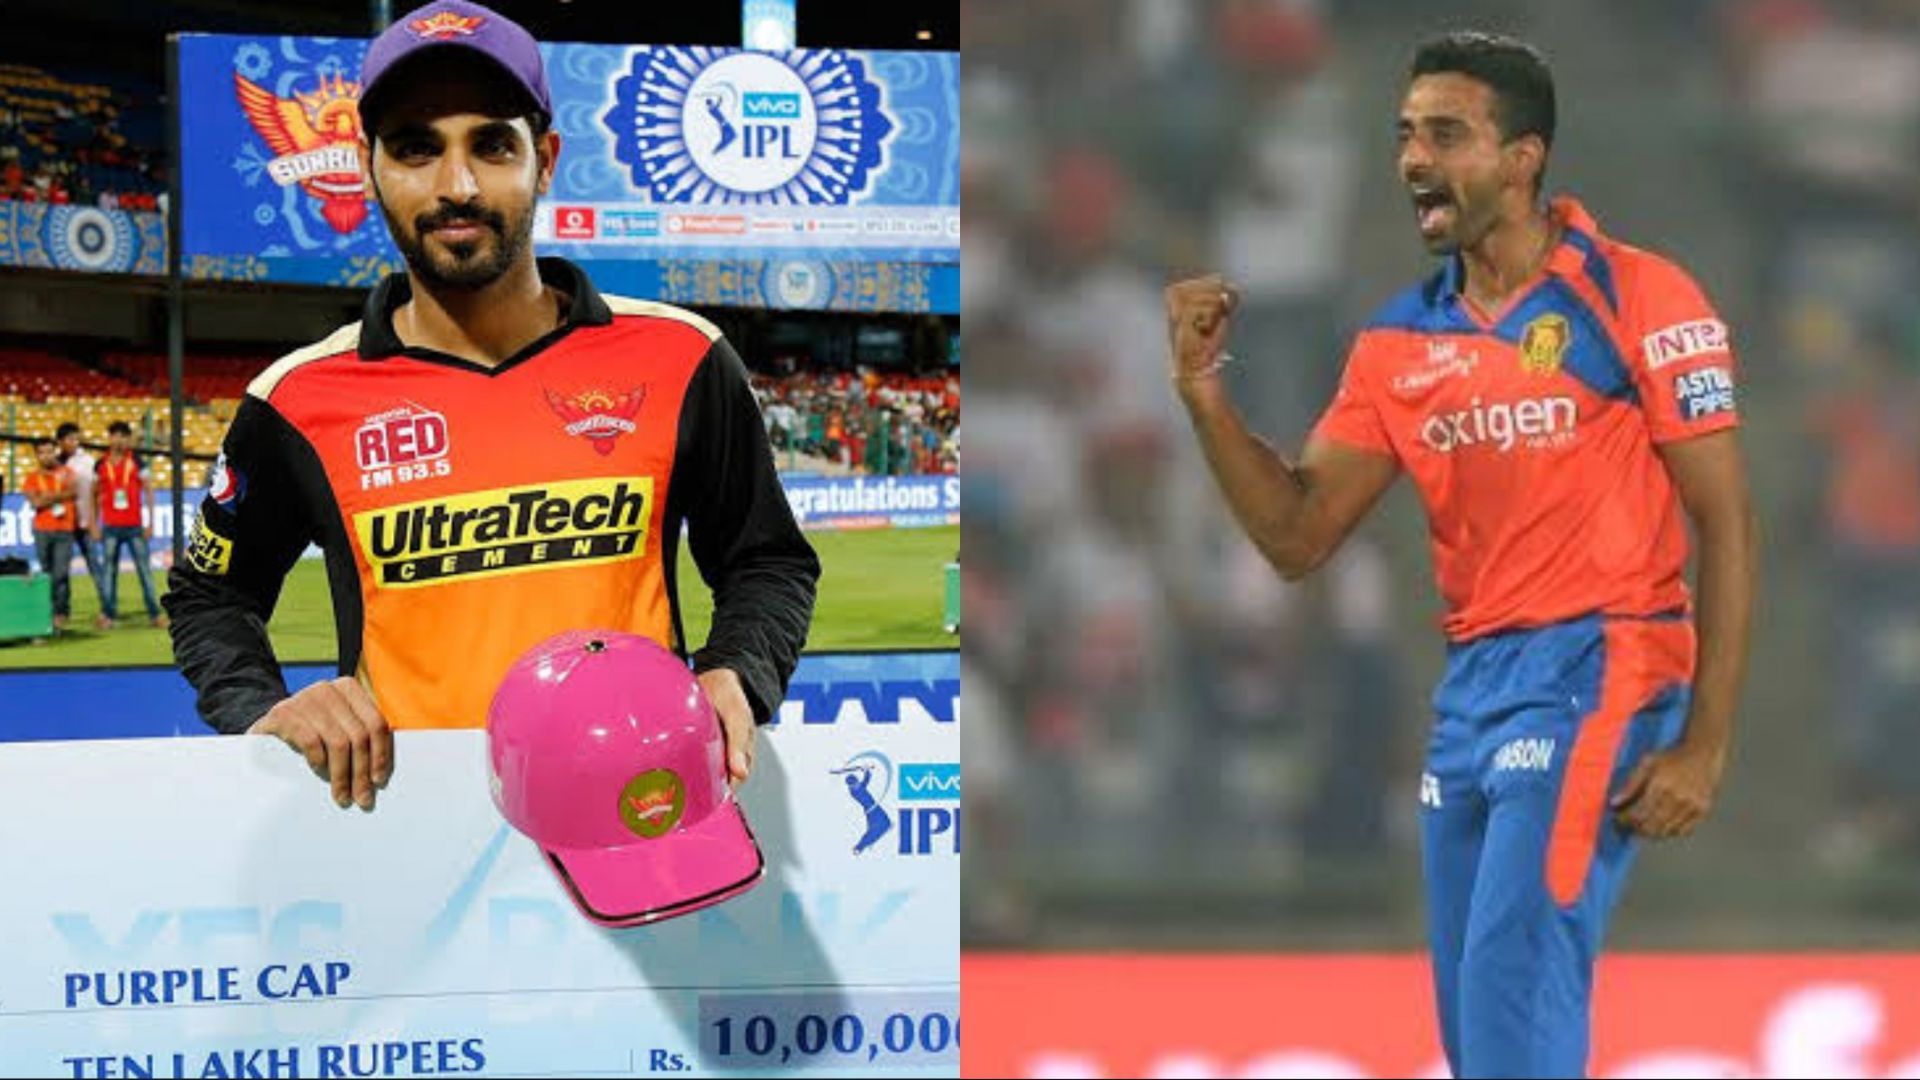 Bhuvneshwar Kumar and Dhawal Kulkarni stole the show with their bowling performances in IPL 2016